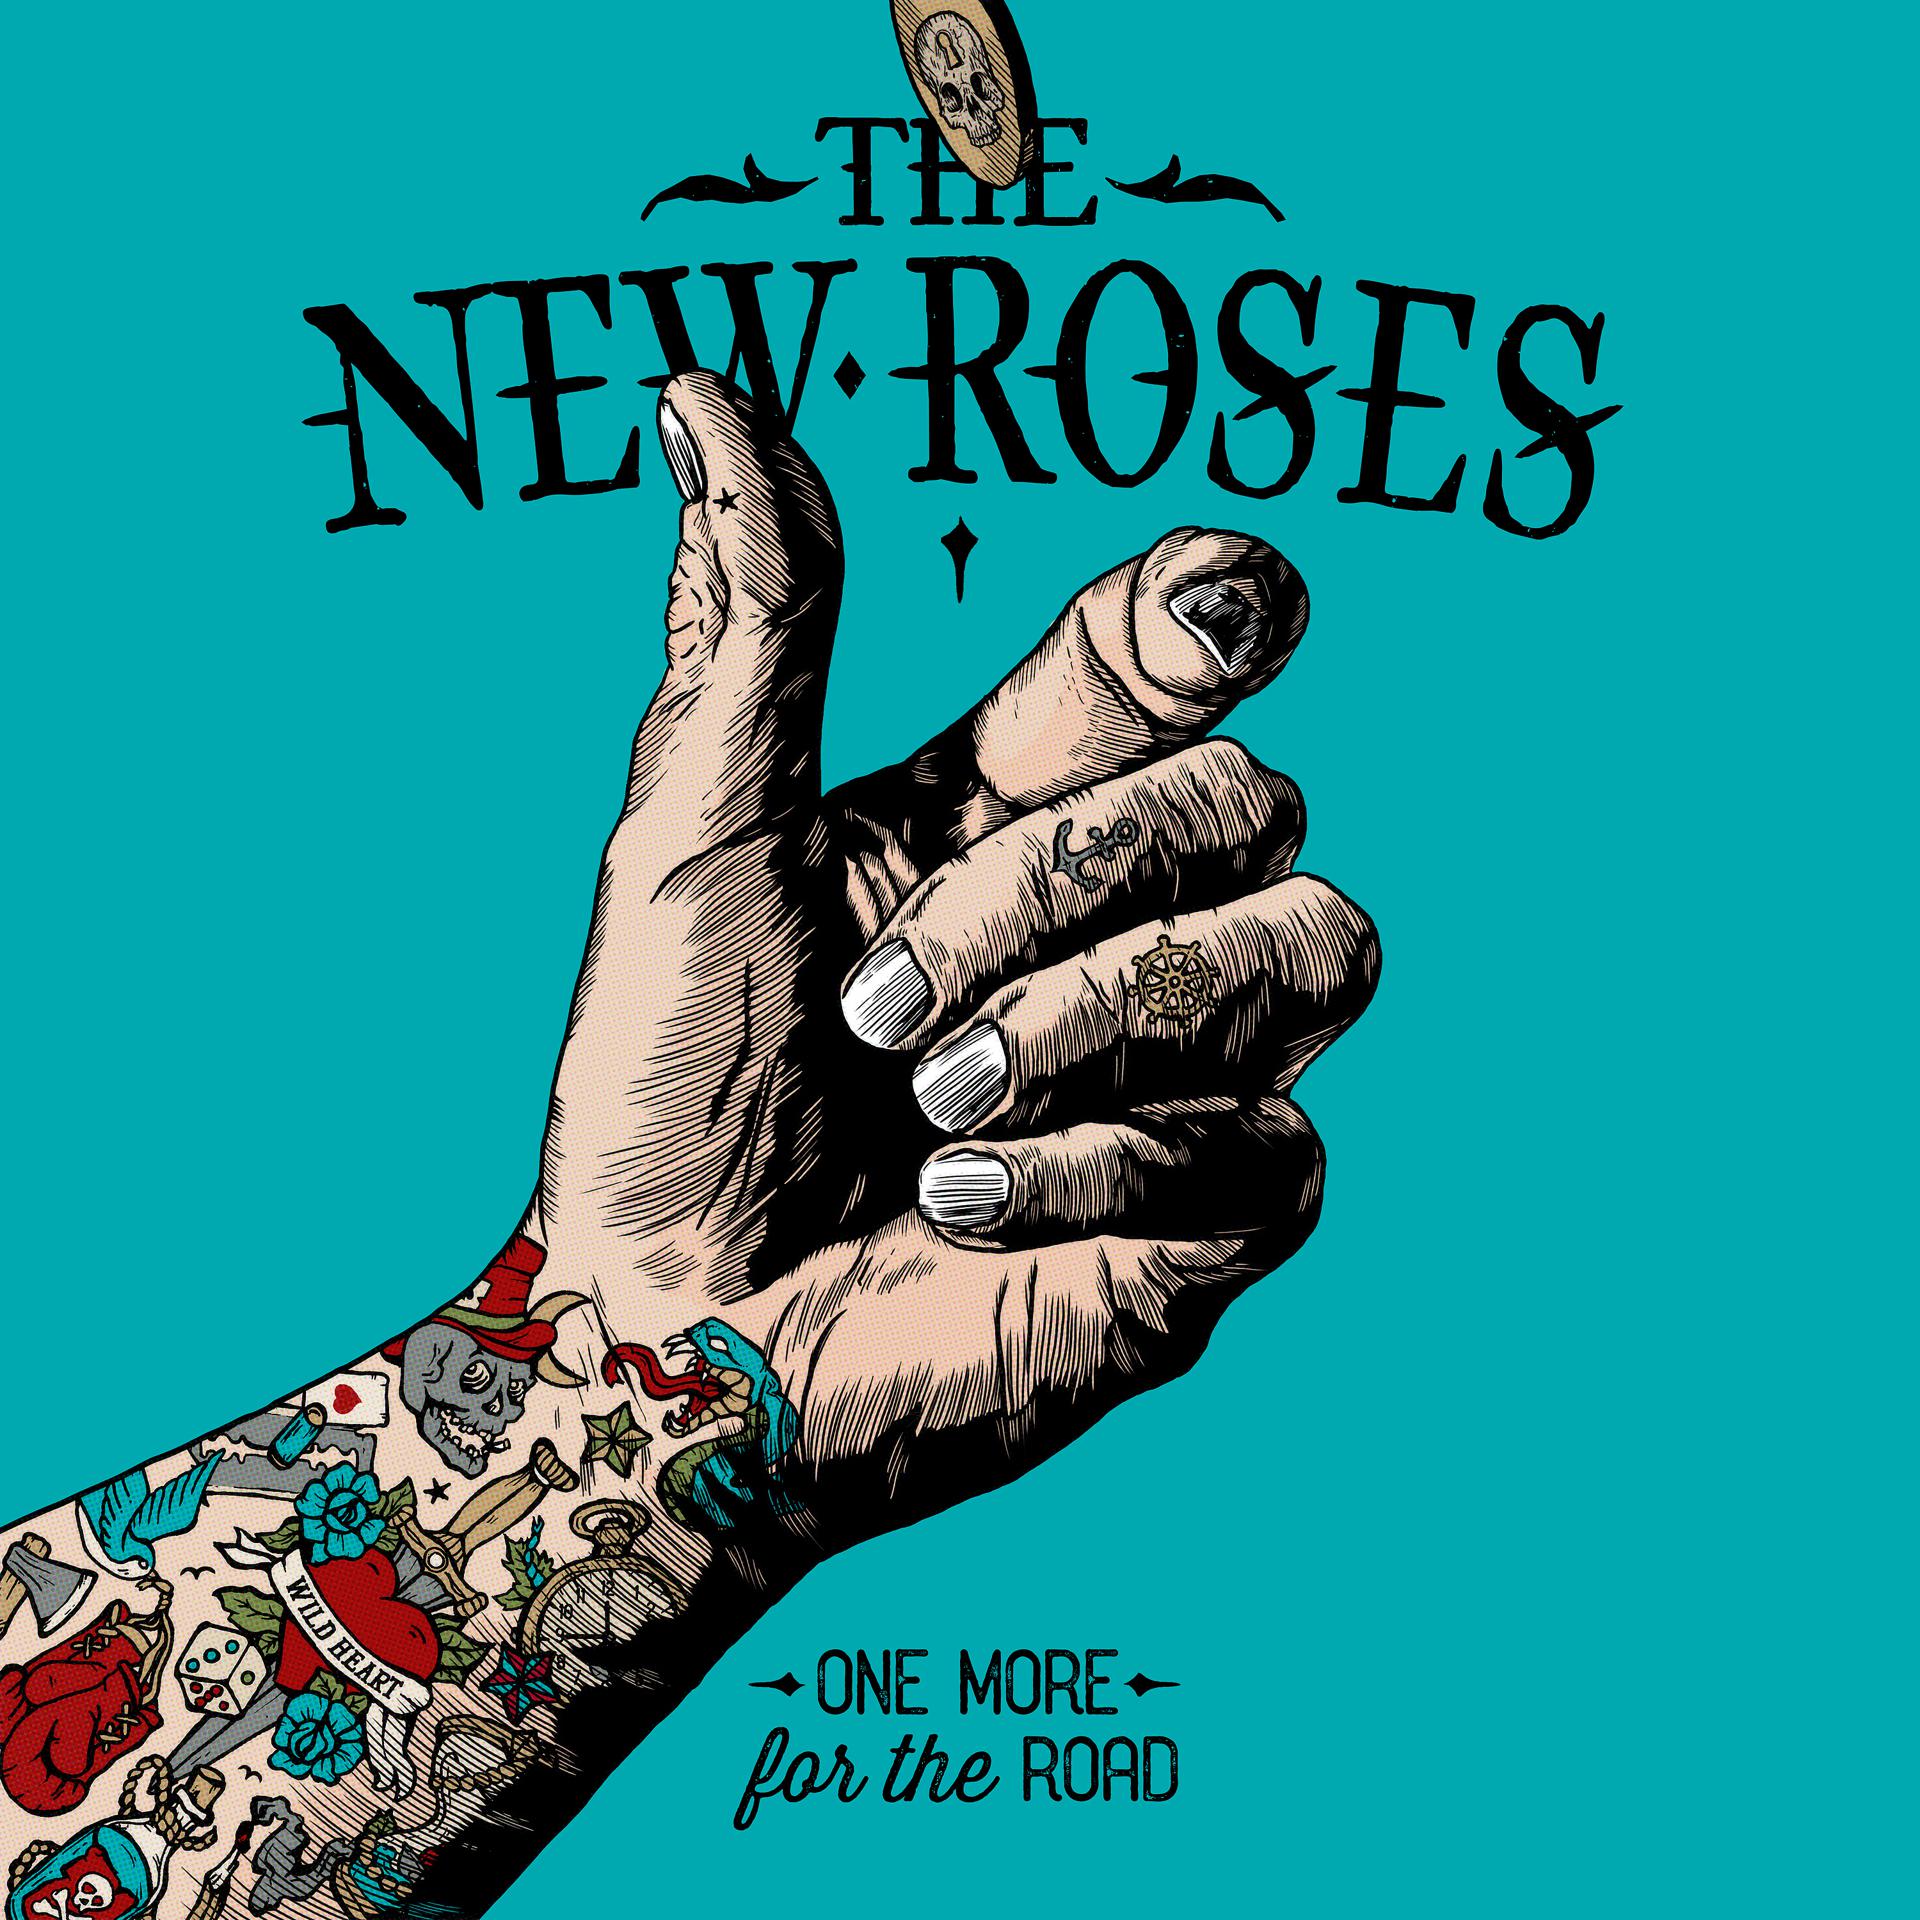 The new roses. The New Roses Dead man's Voice. One for the Road. The New Roses - one more for the Road (2017)(FLAC)(CD).